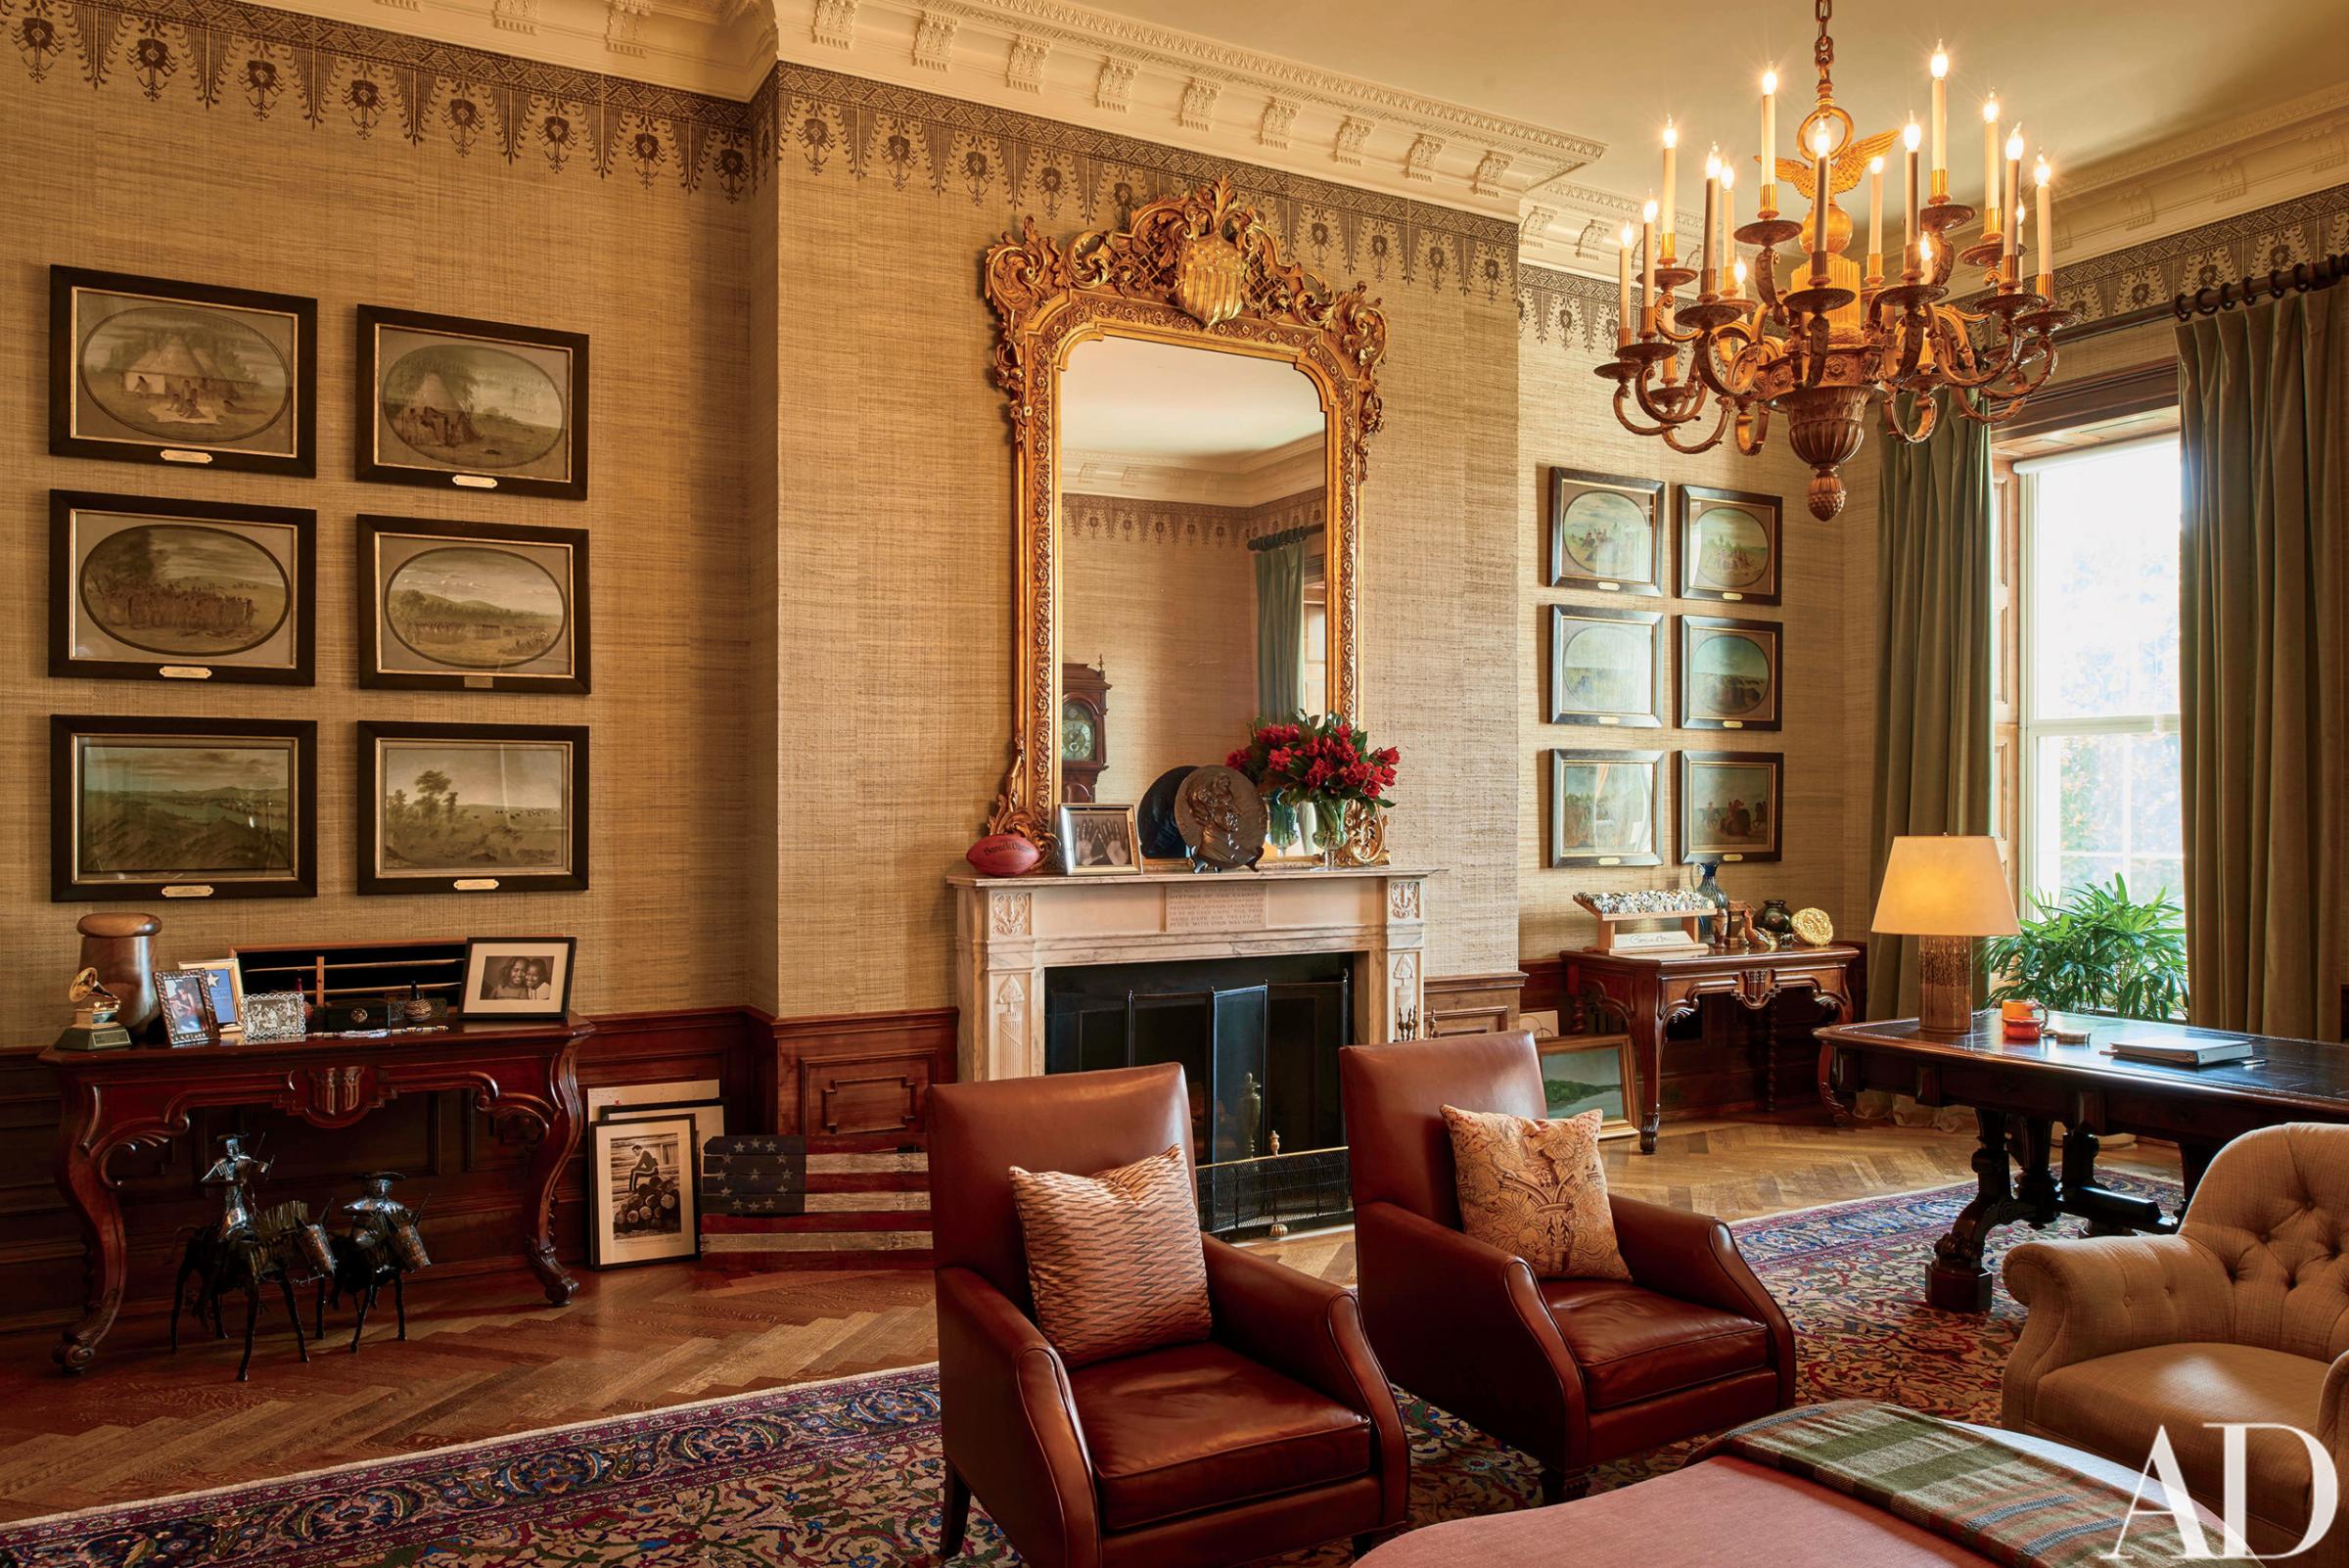 The Treaty Room in the White House in Washington in August 2016. The Treaty Room is filled with memorabilia including one of President Barack Obama's two Grammy Awards, family photos, and a personalized football. It’s also where Obama often retreats late at night. He uses the room’s namesake table, which has been in the White House since 1869, as a desk. Obama likes to say the White House is the “people’s house.”